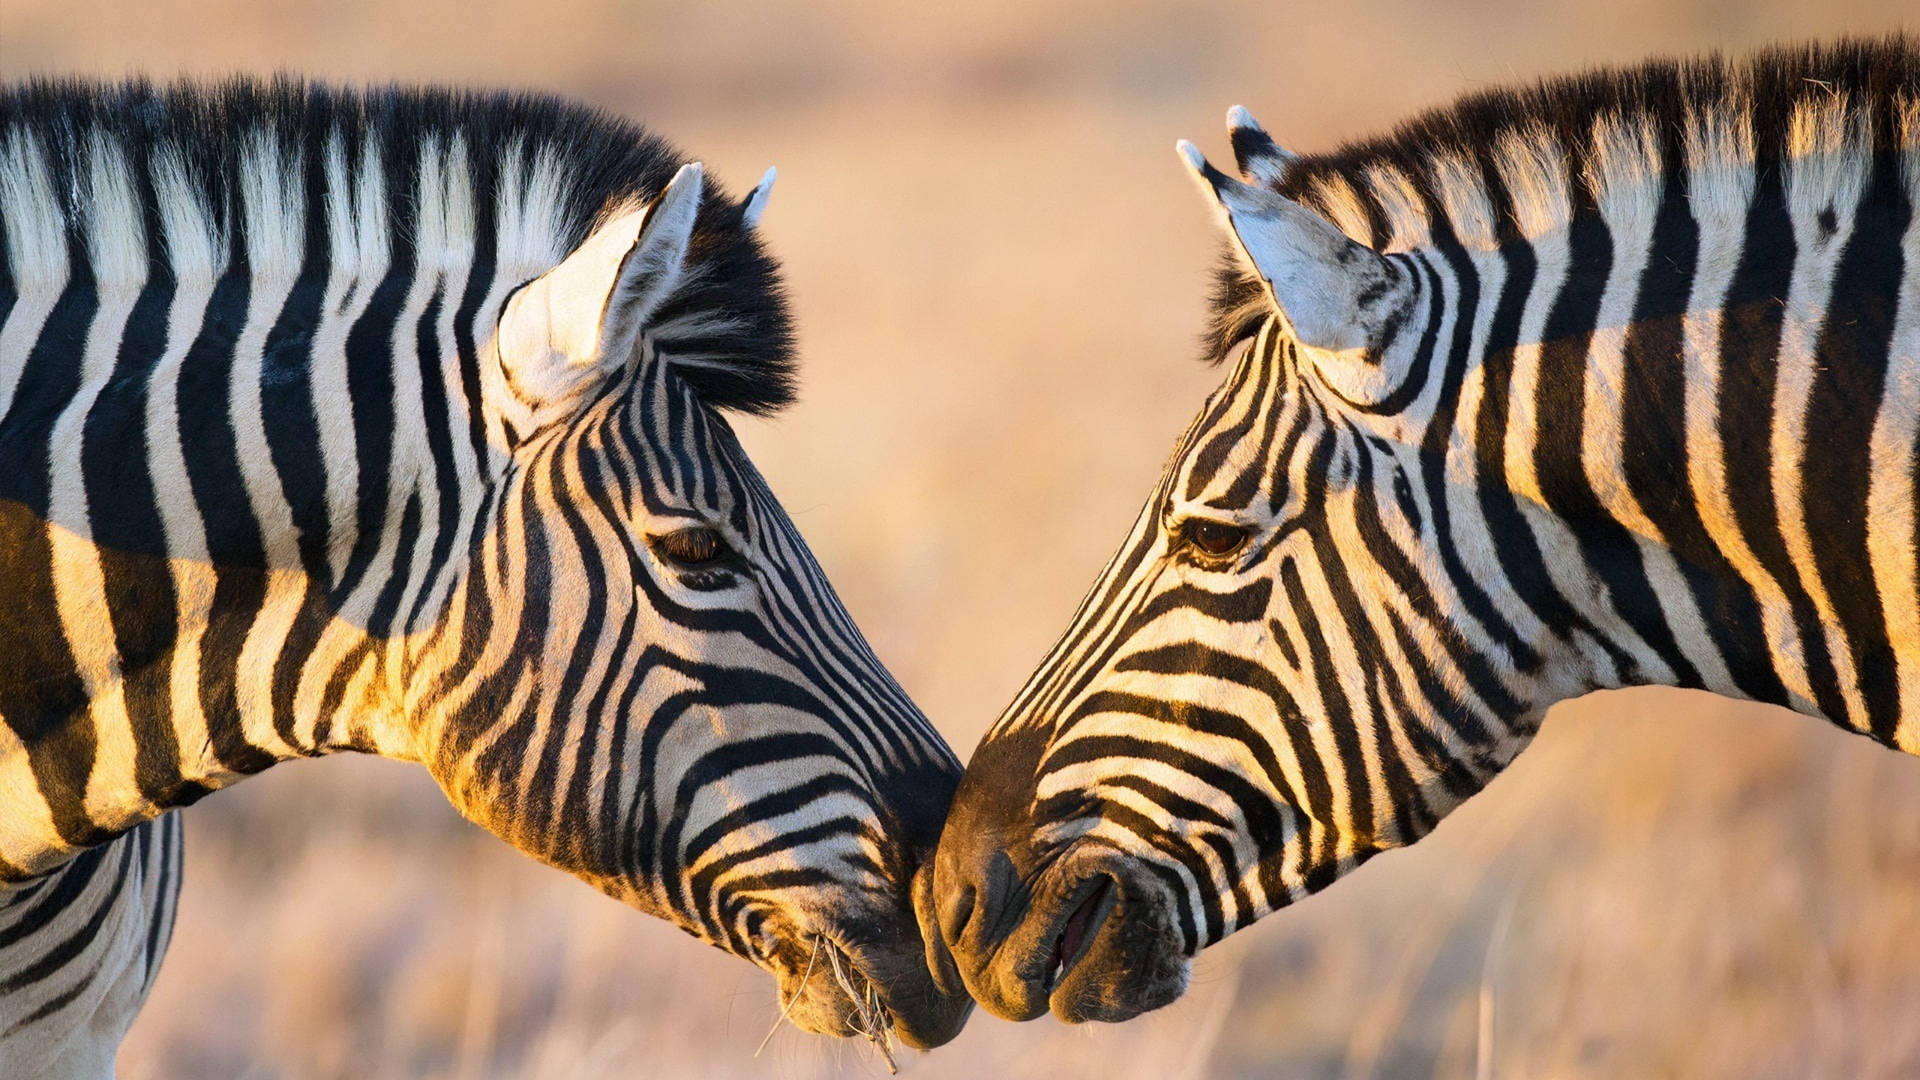 Two Zebras Face To Face Wallpaper